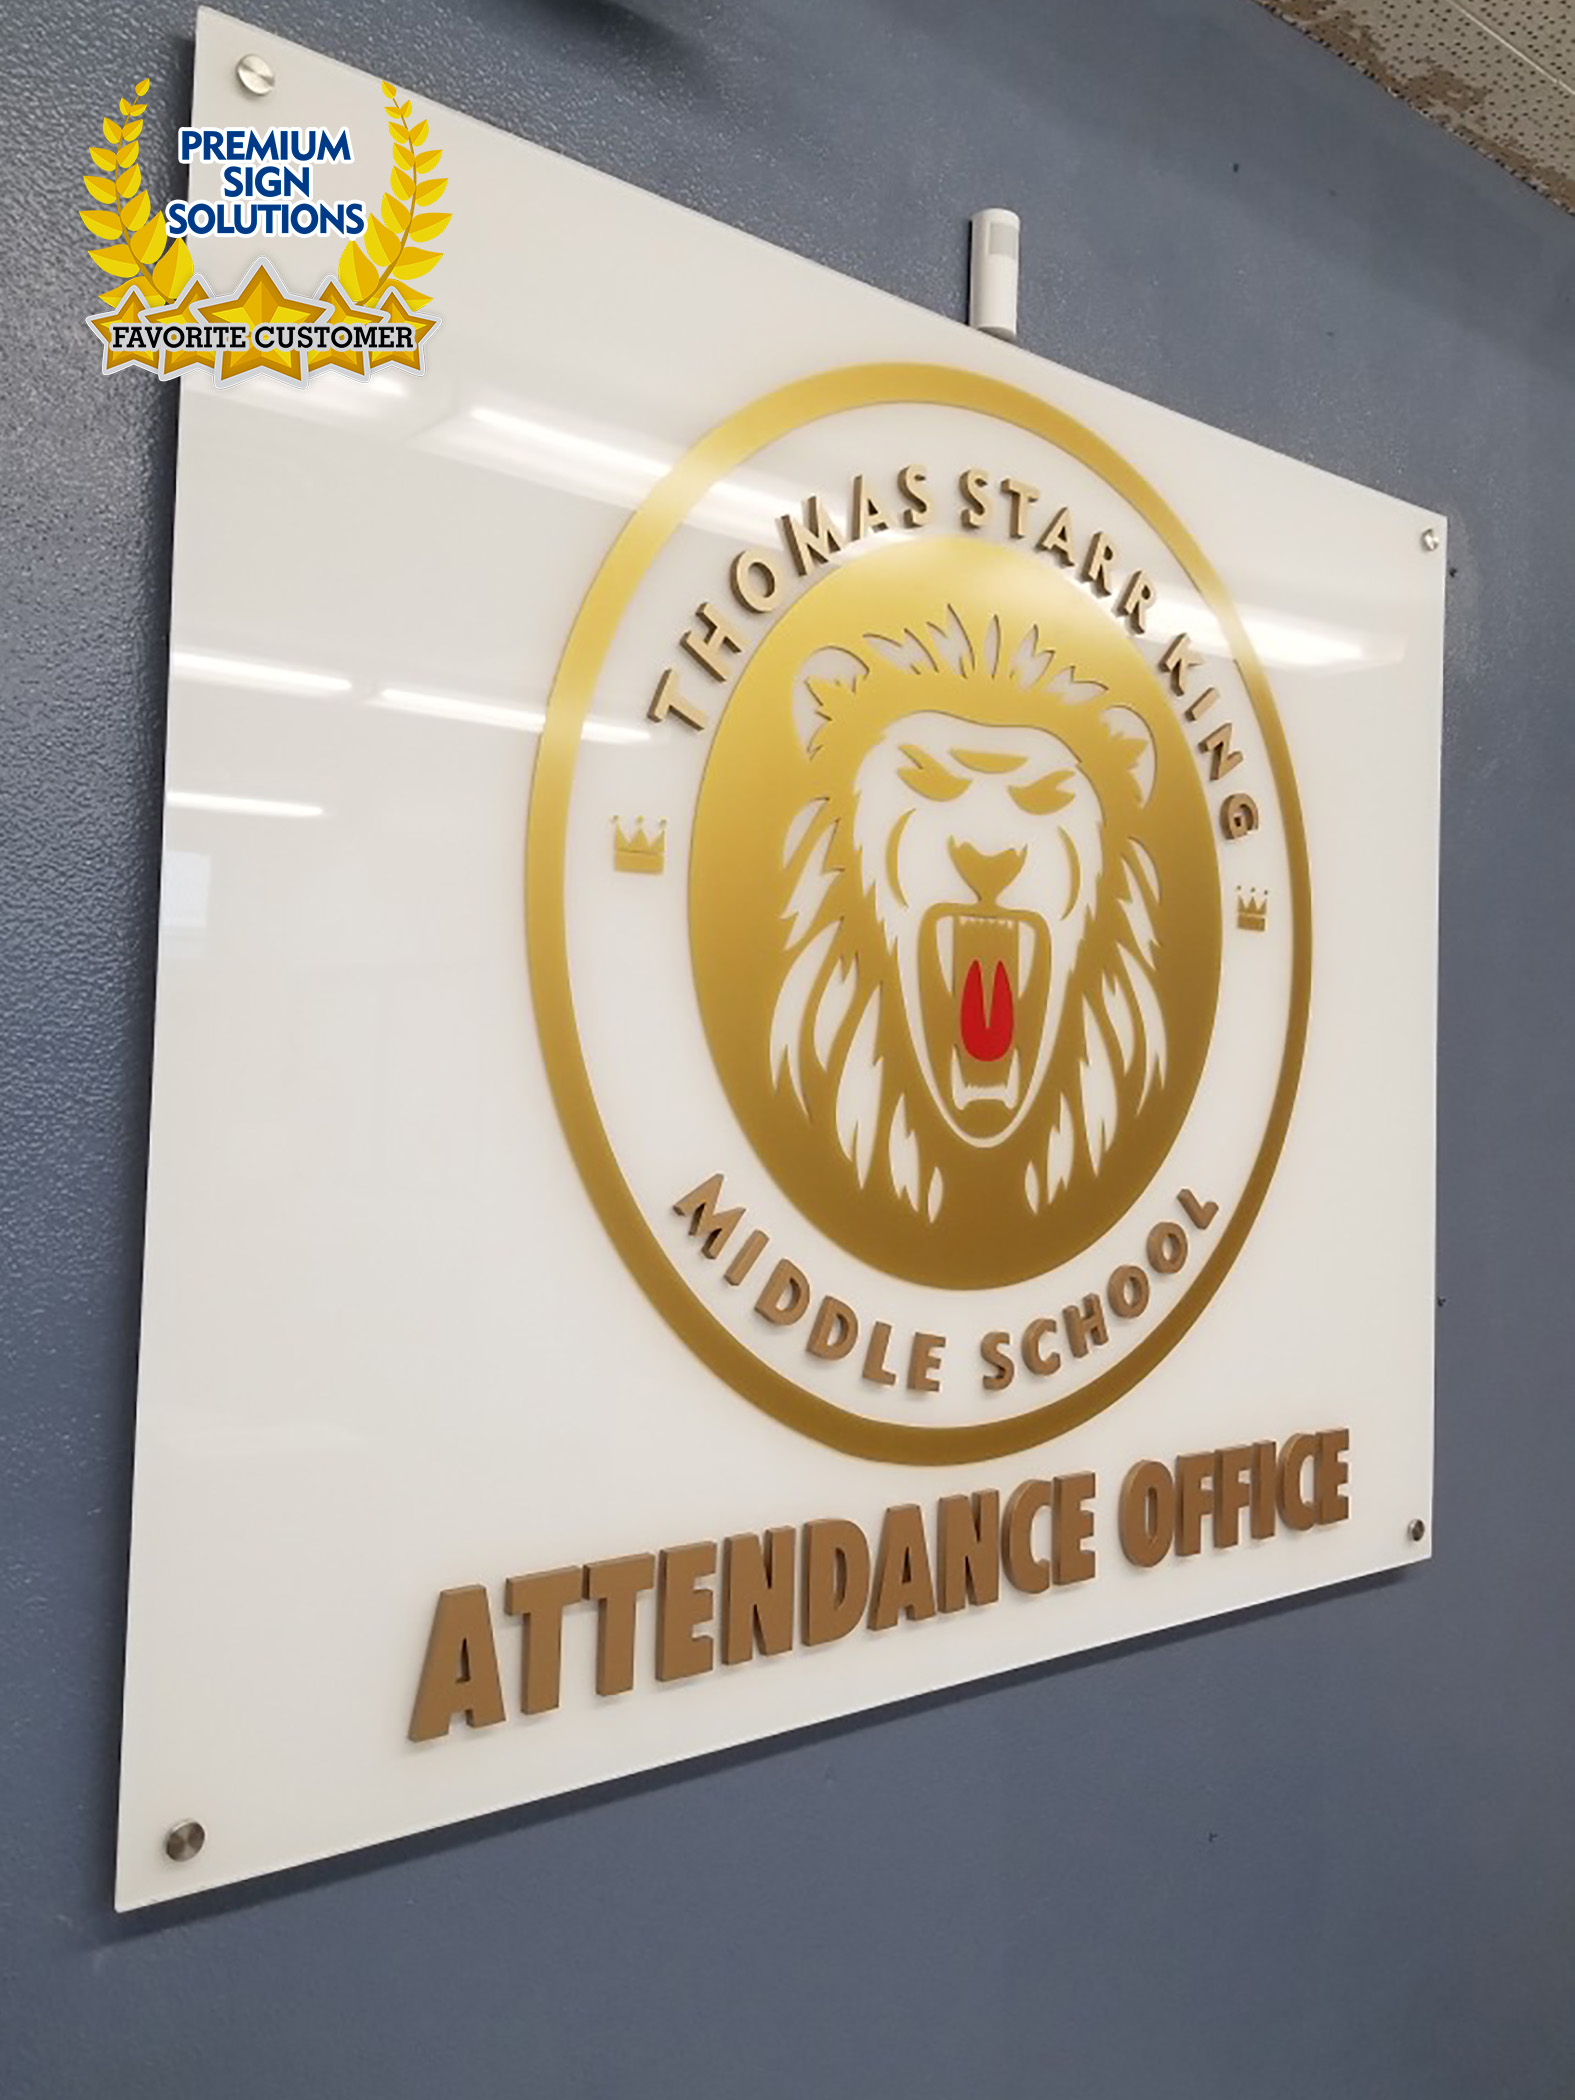 You are currently viewing Our Favorite Clients: Thomas Starr King Middle School in Los Angeles